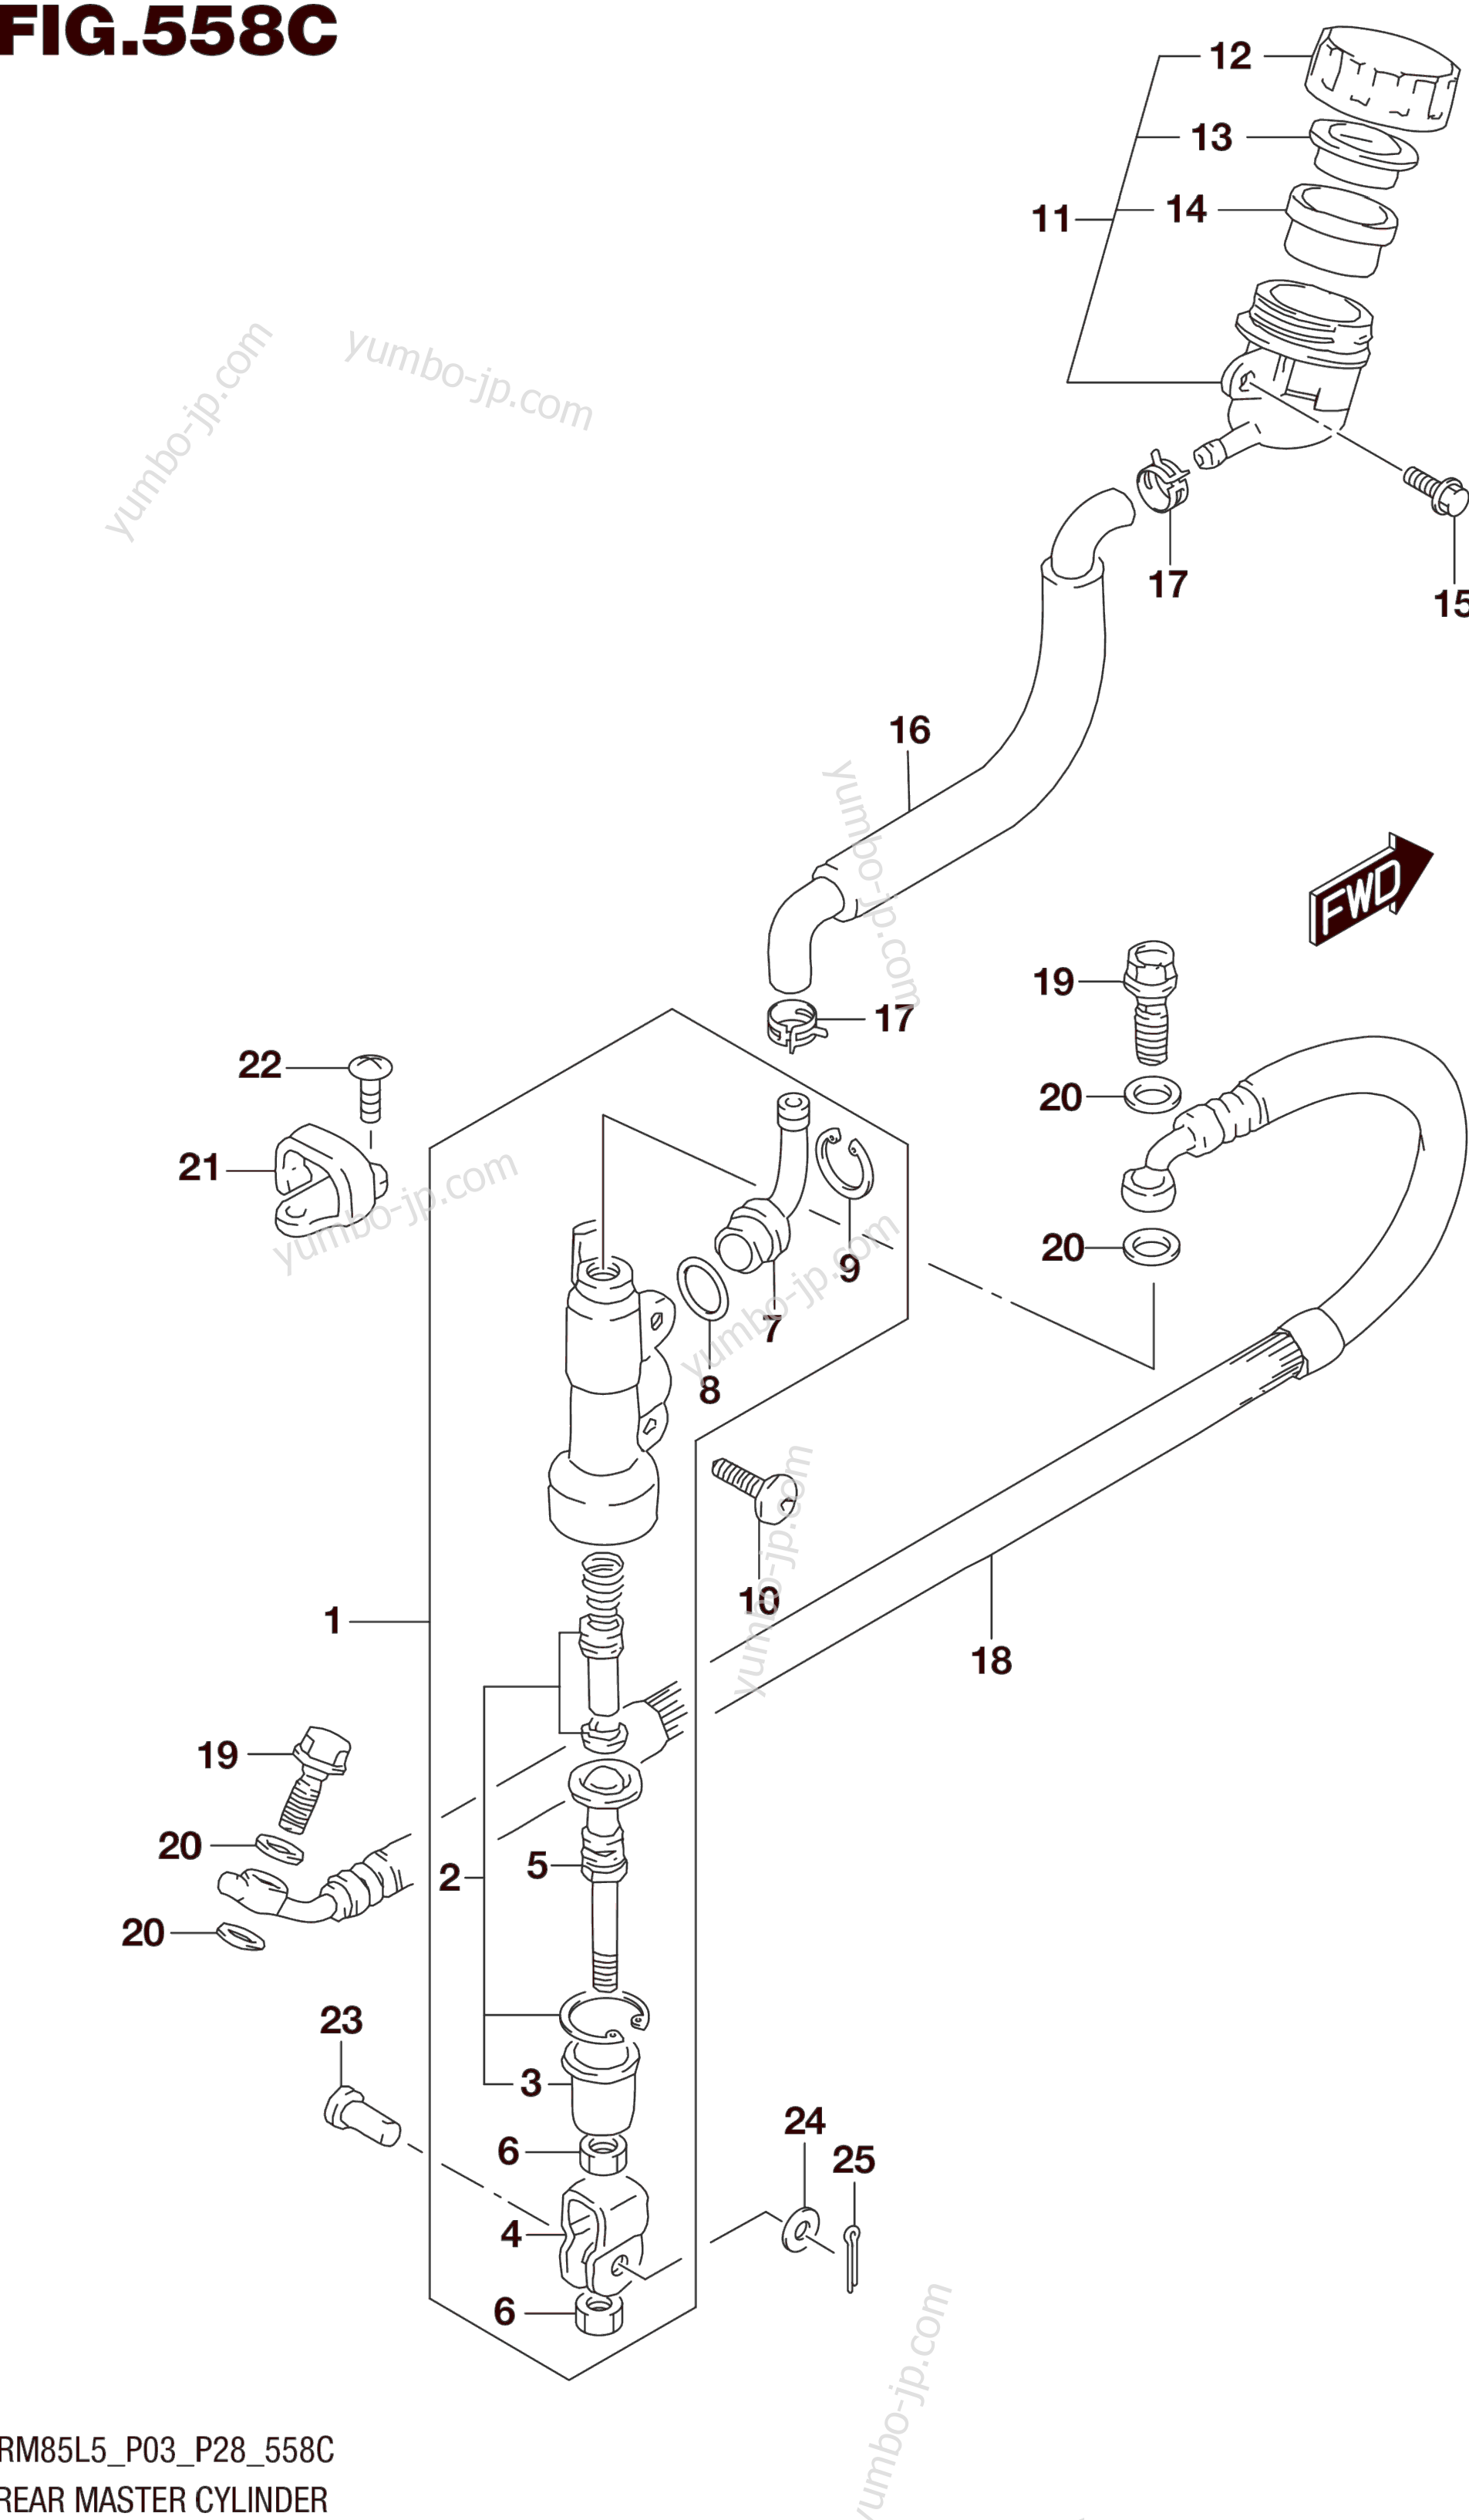 REAR MASTER CYLINDER (RM85LL5 P28) for motorcycles SUZUKI RM85 2015 year